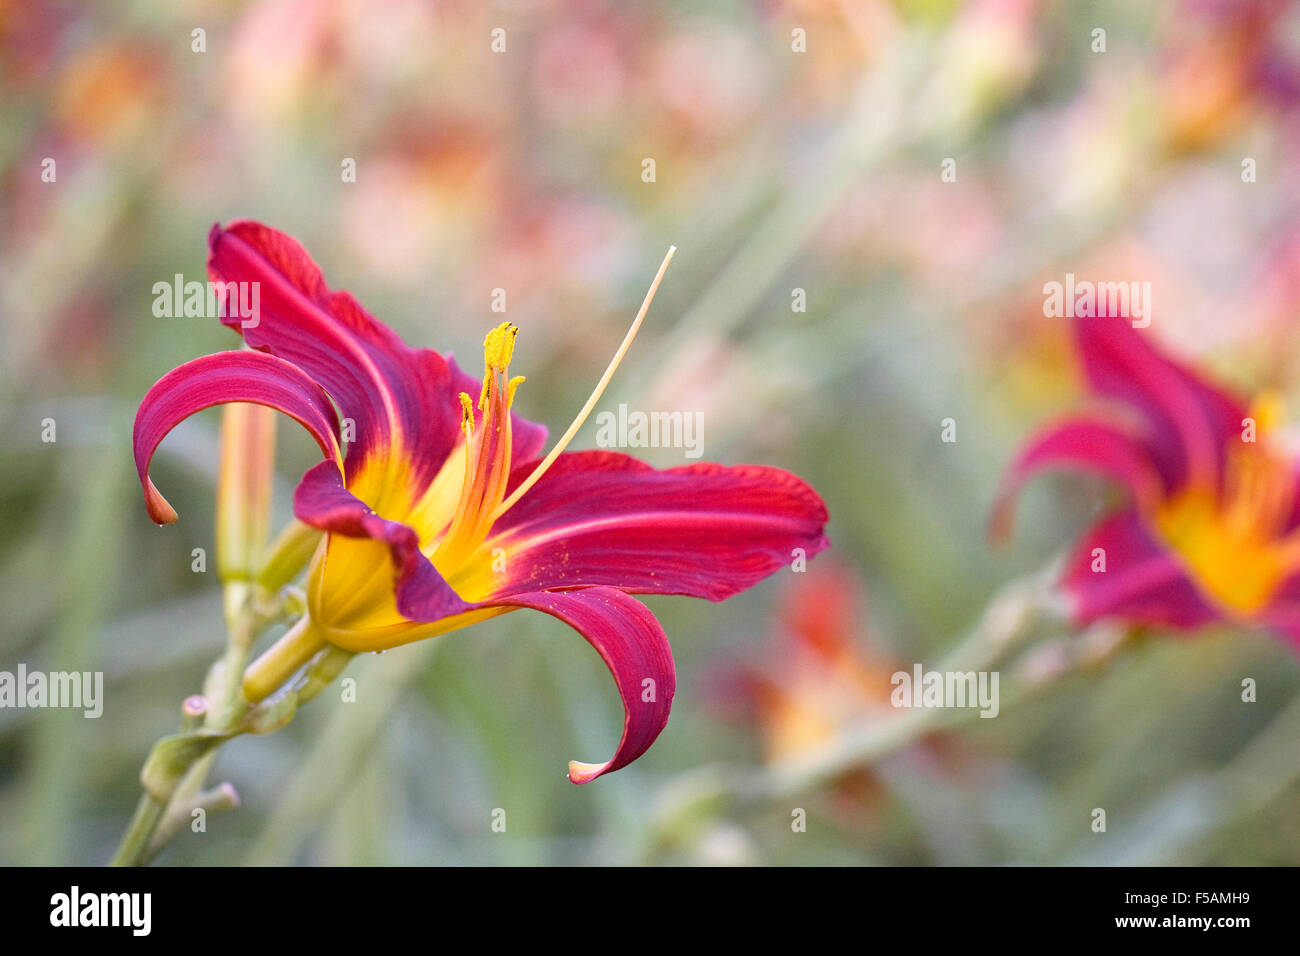 Hemerocallis 'Stafford'. Deep Red Daylily flower in an herbaceous border. Stock Photo